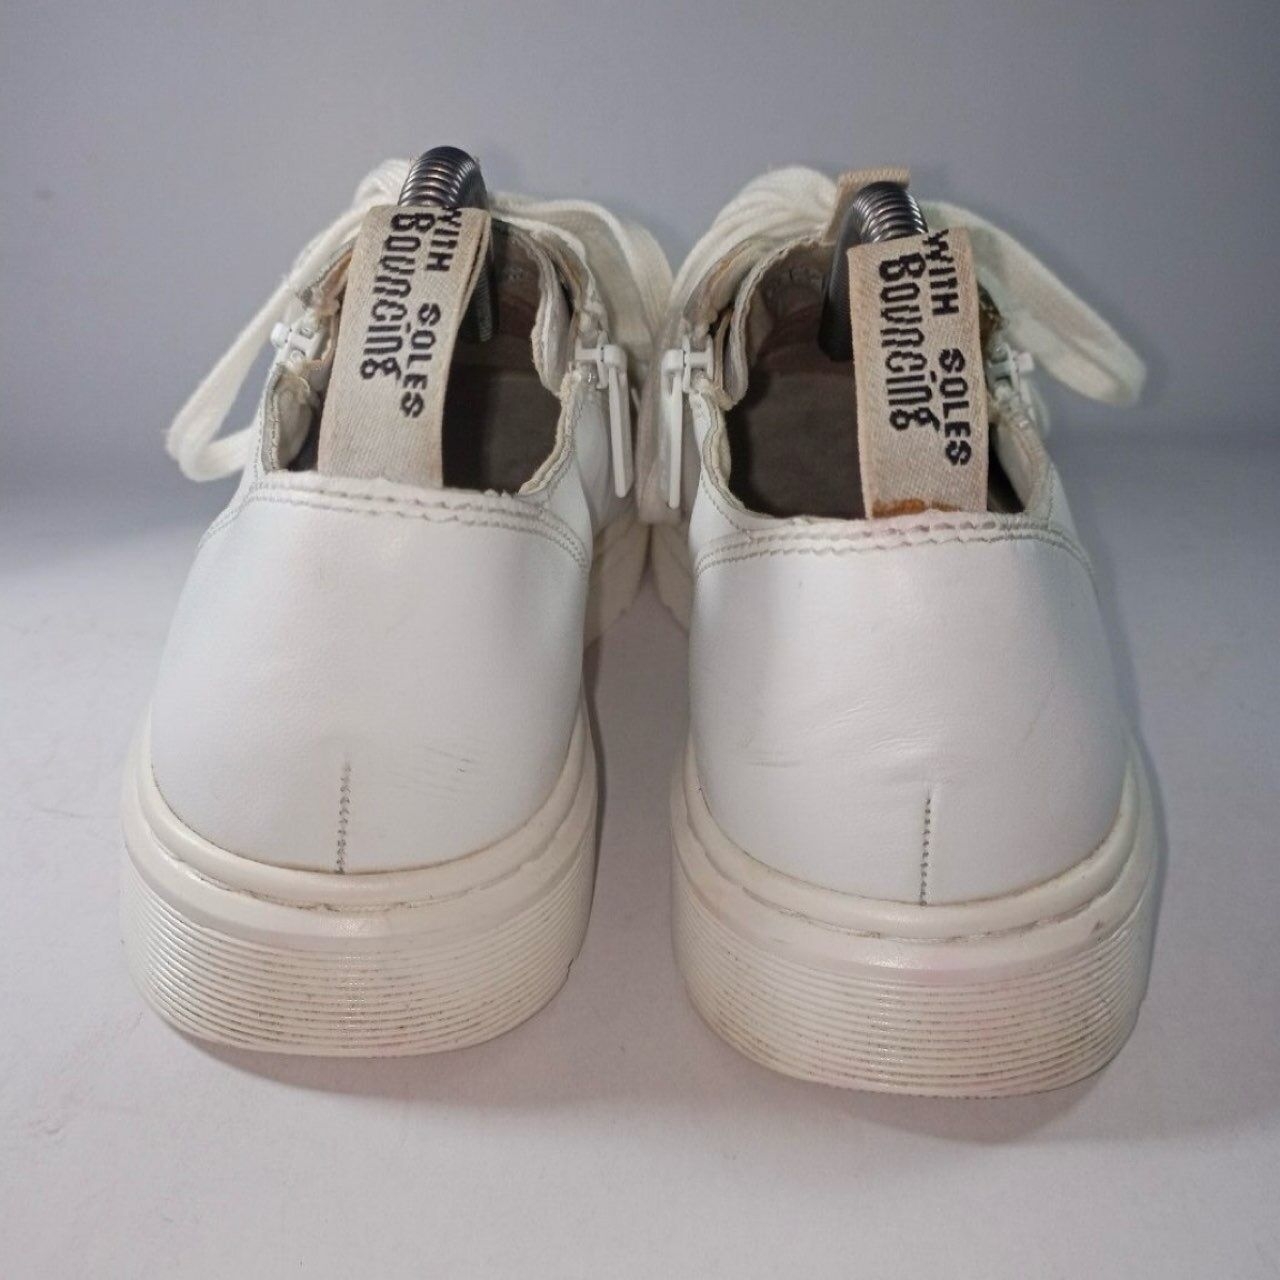 Dr. Martens Dante Zip Distressed White Leather Sneakers